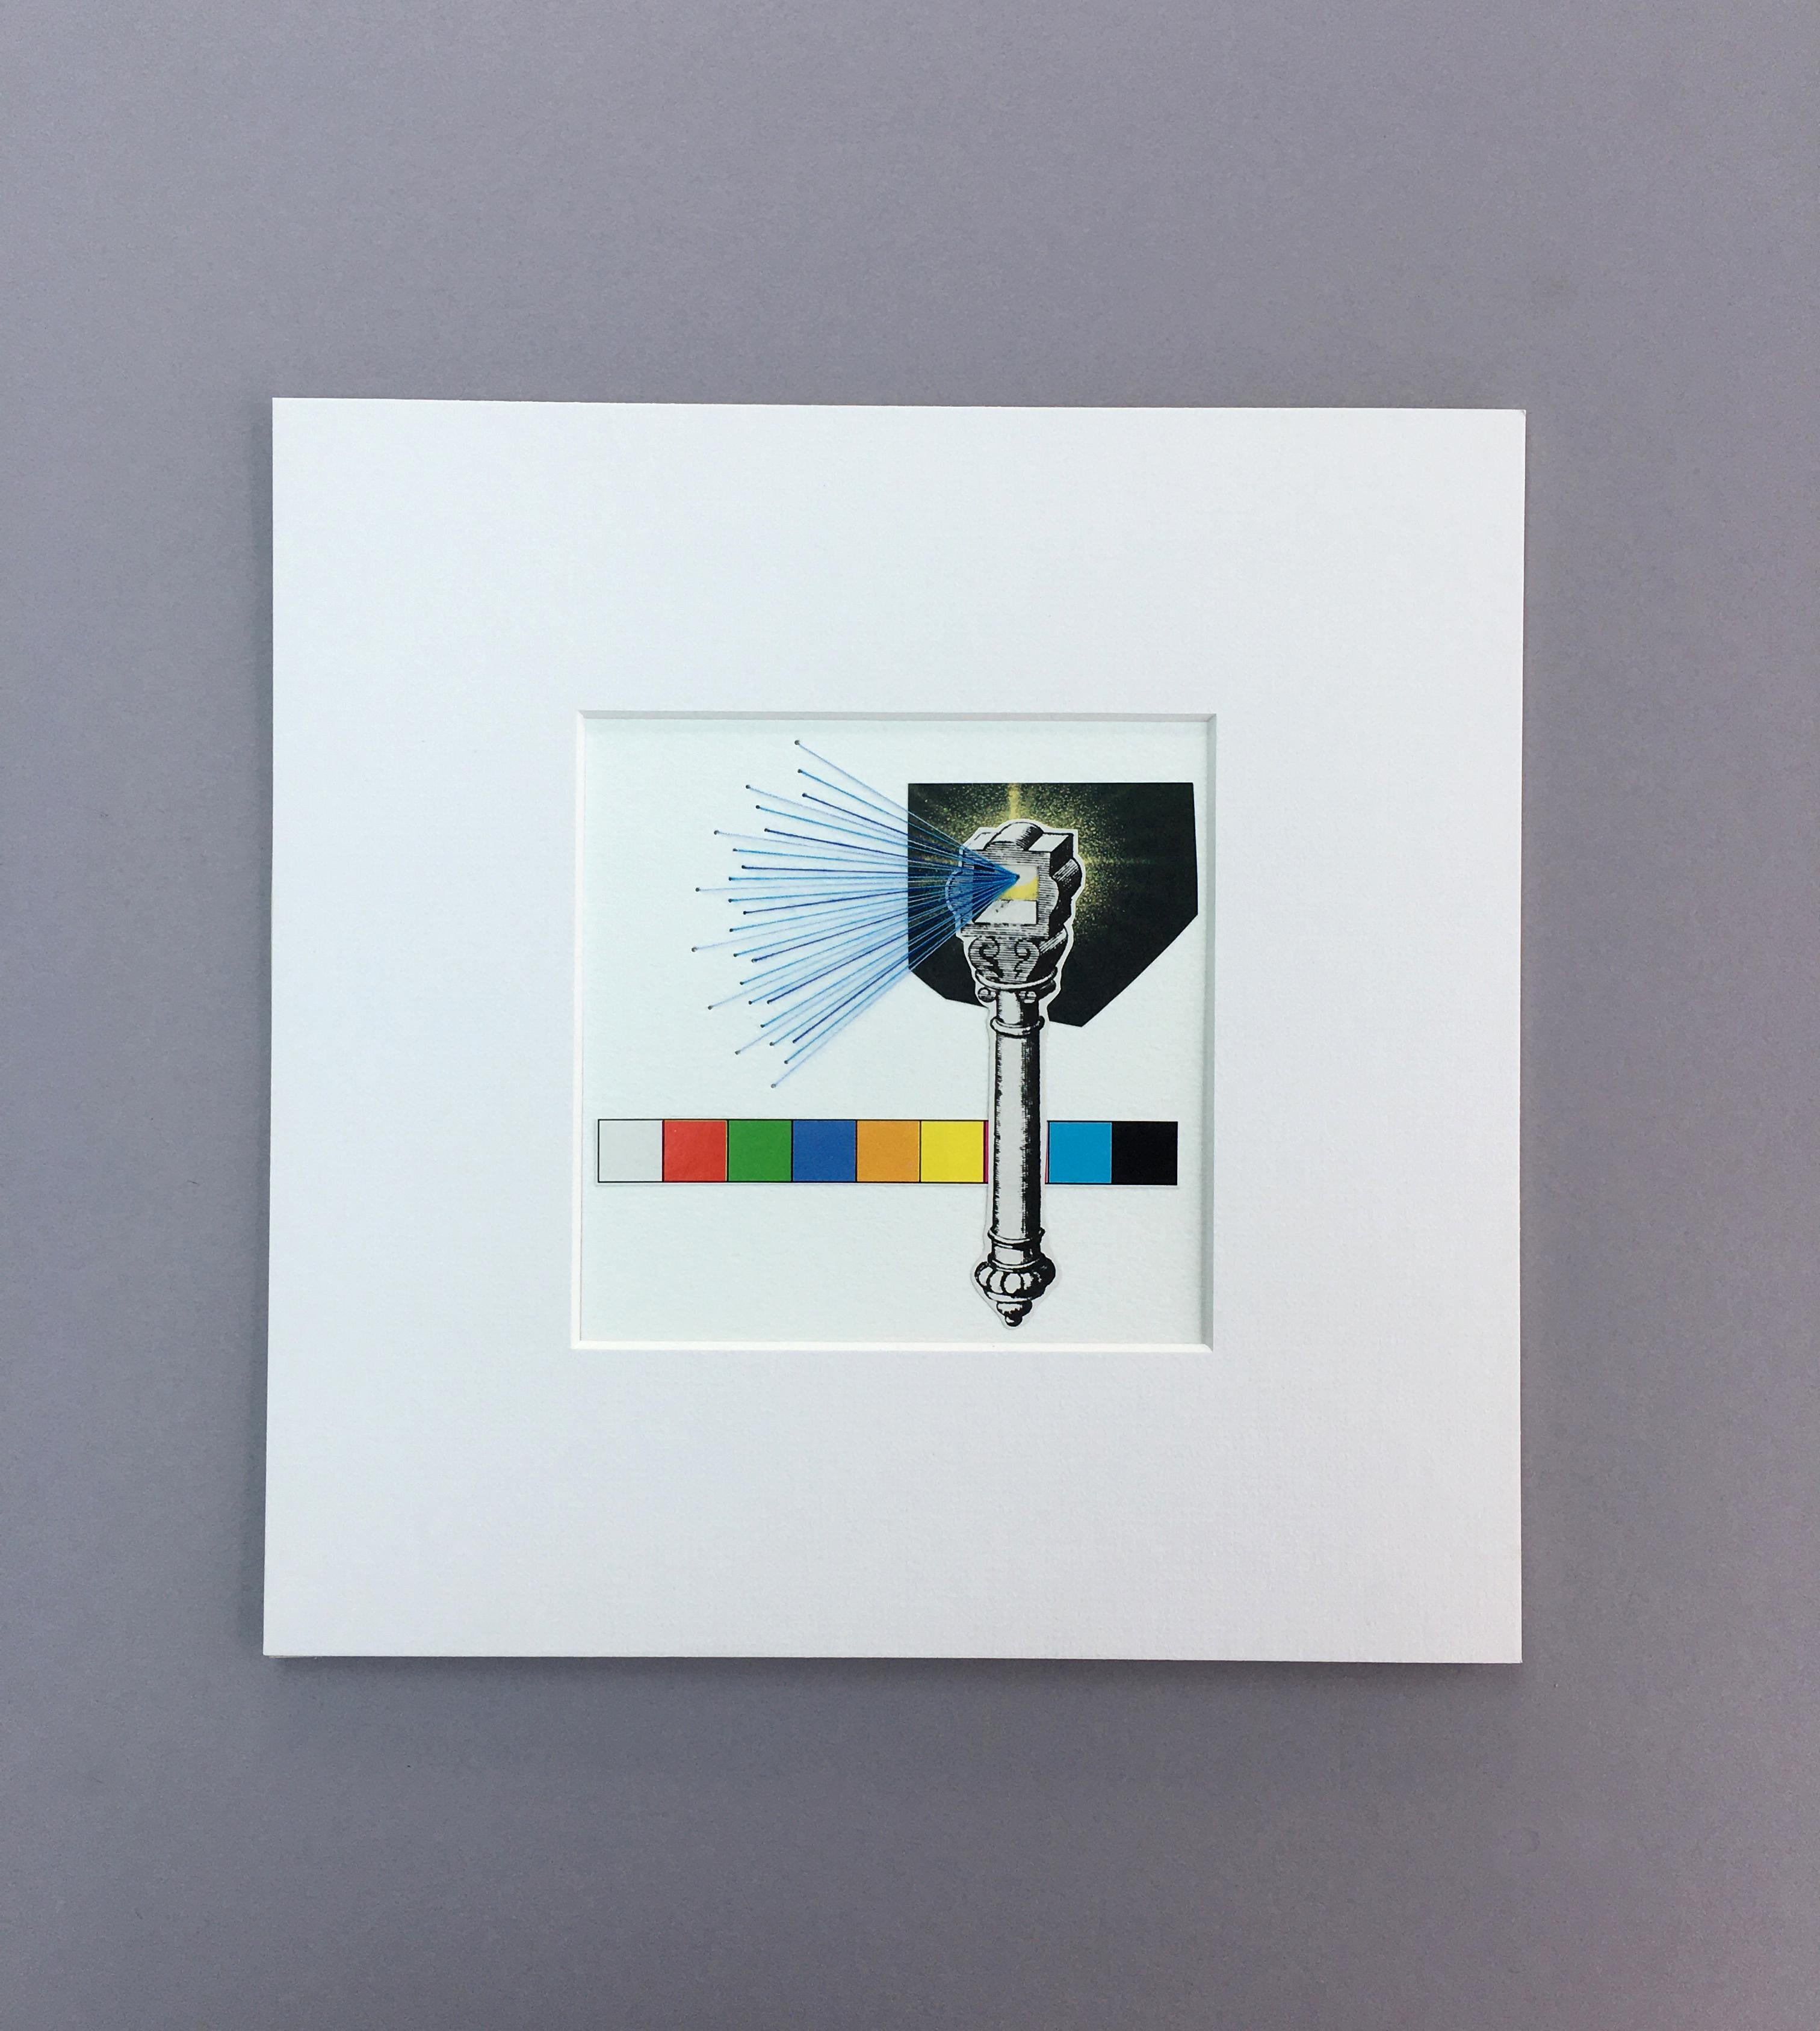 <p>Artist Comments<br>Artist John Gardner displays a modern abstract with elements of geometric minimalism. The figurative symbols explore the connection between vision and reality. The scepter functions as an instrument that connects what we see